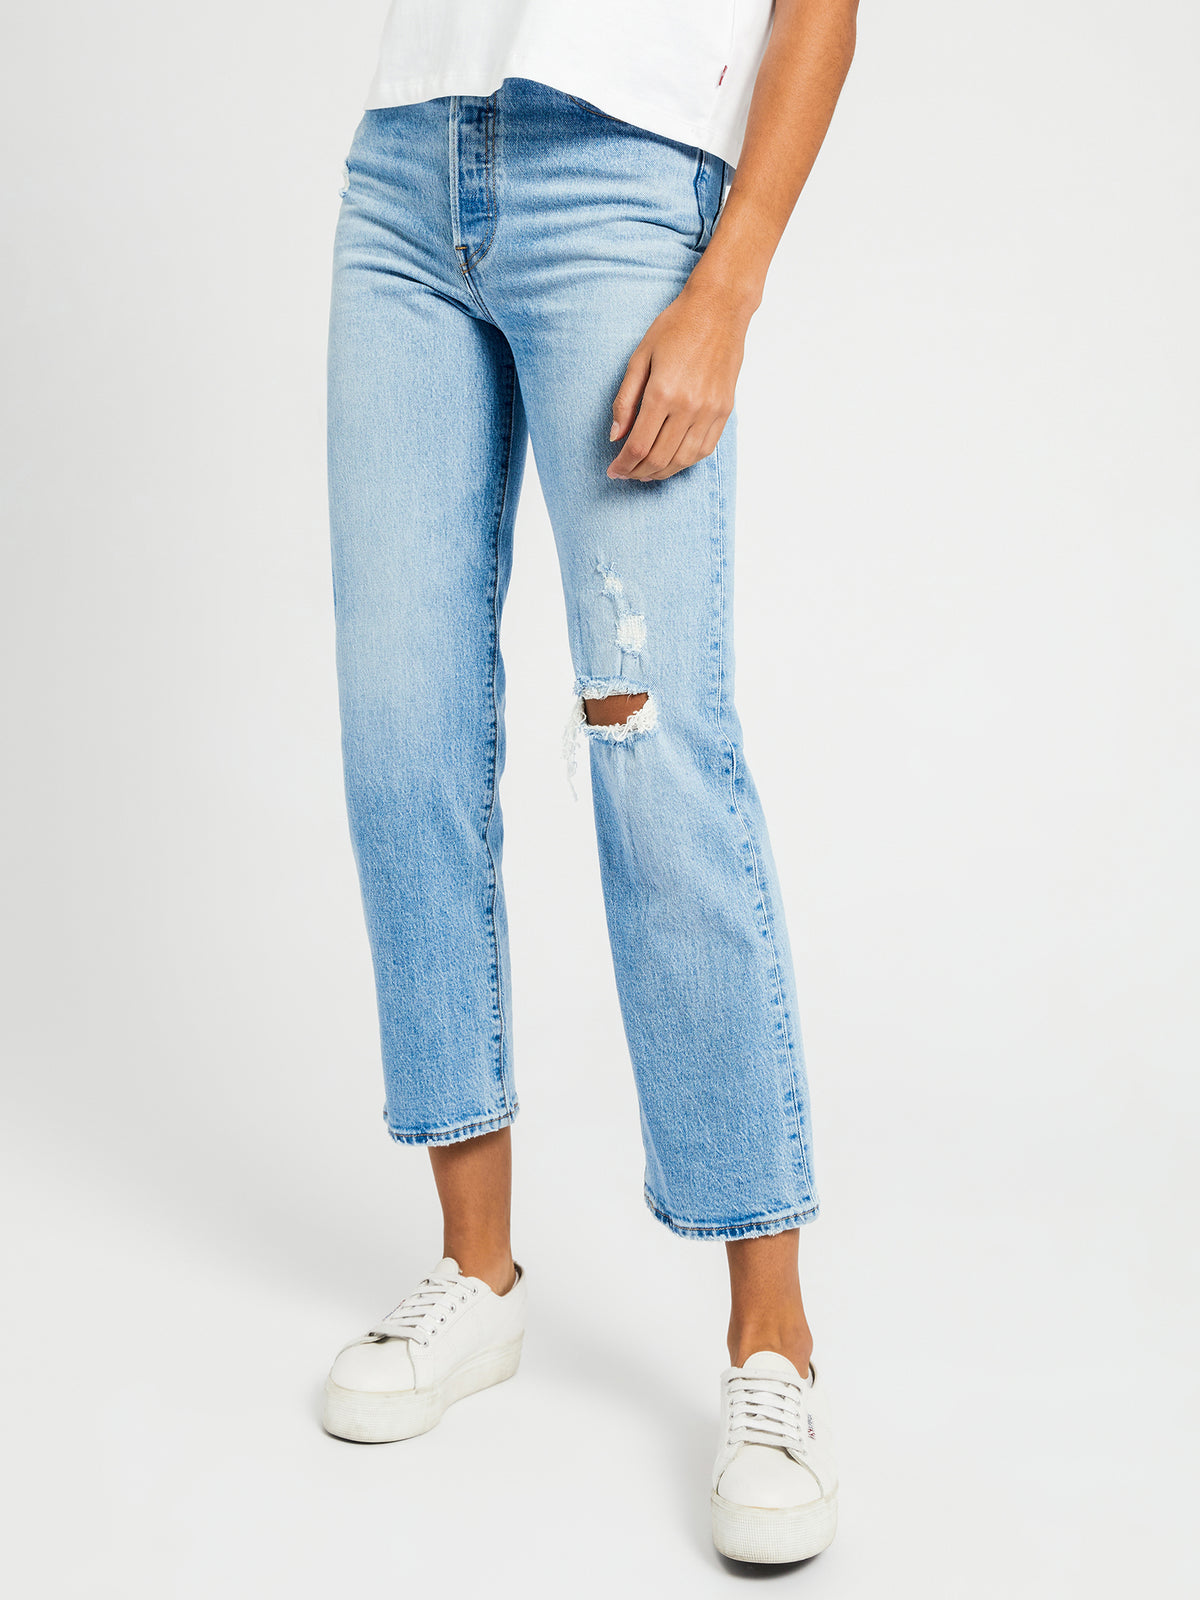 Ribcage Straight Ankle Jeans in Tango Fade Blue Denim